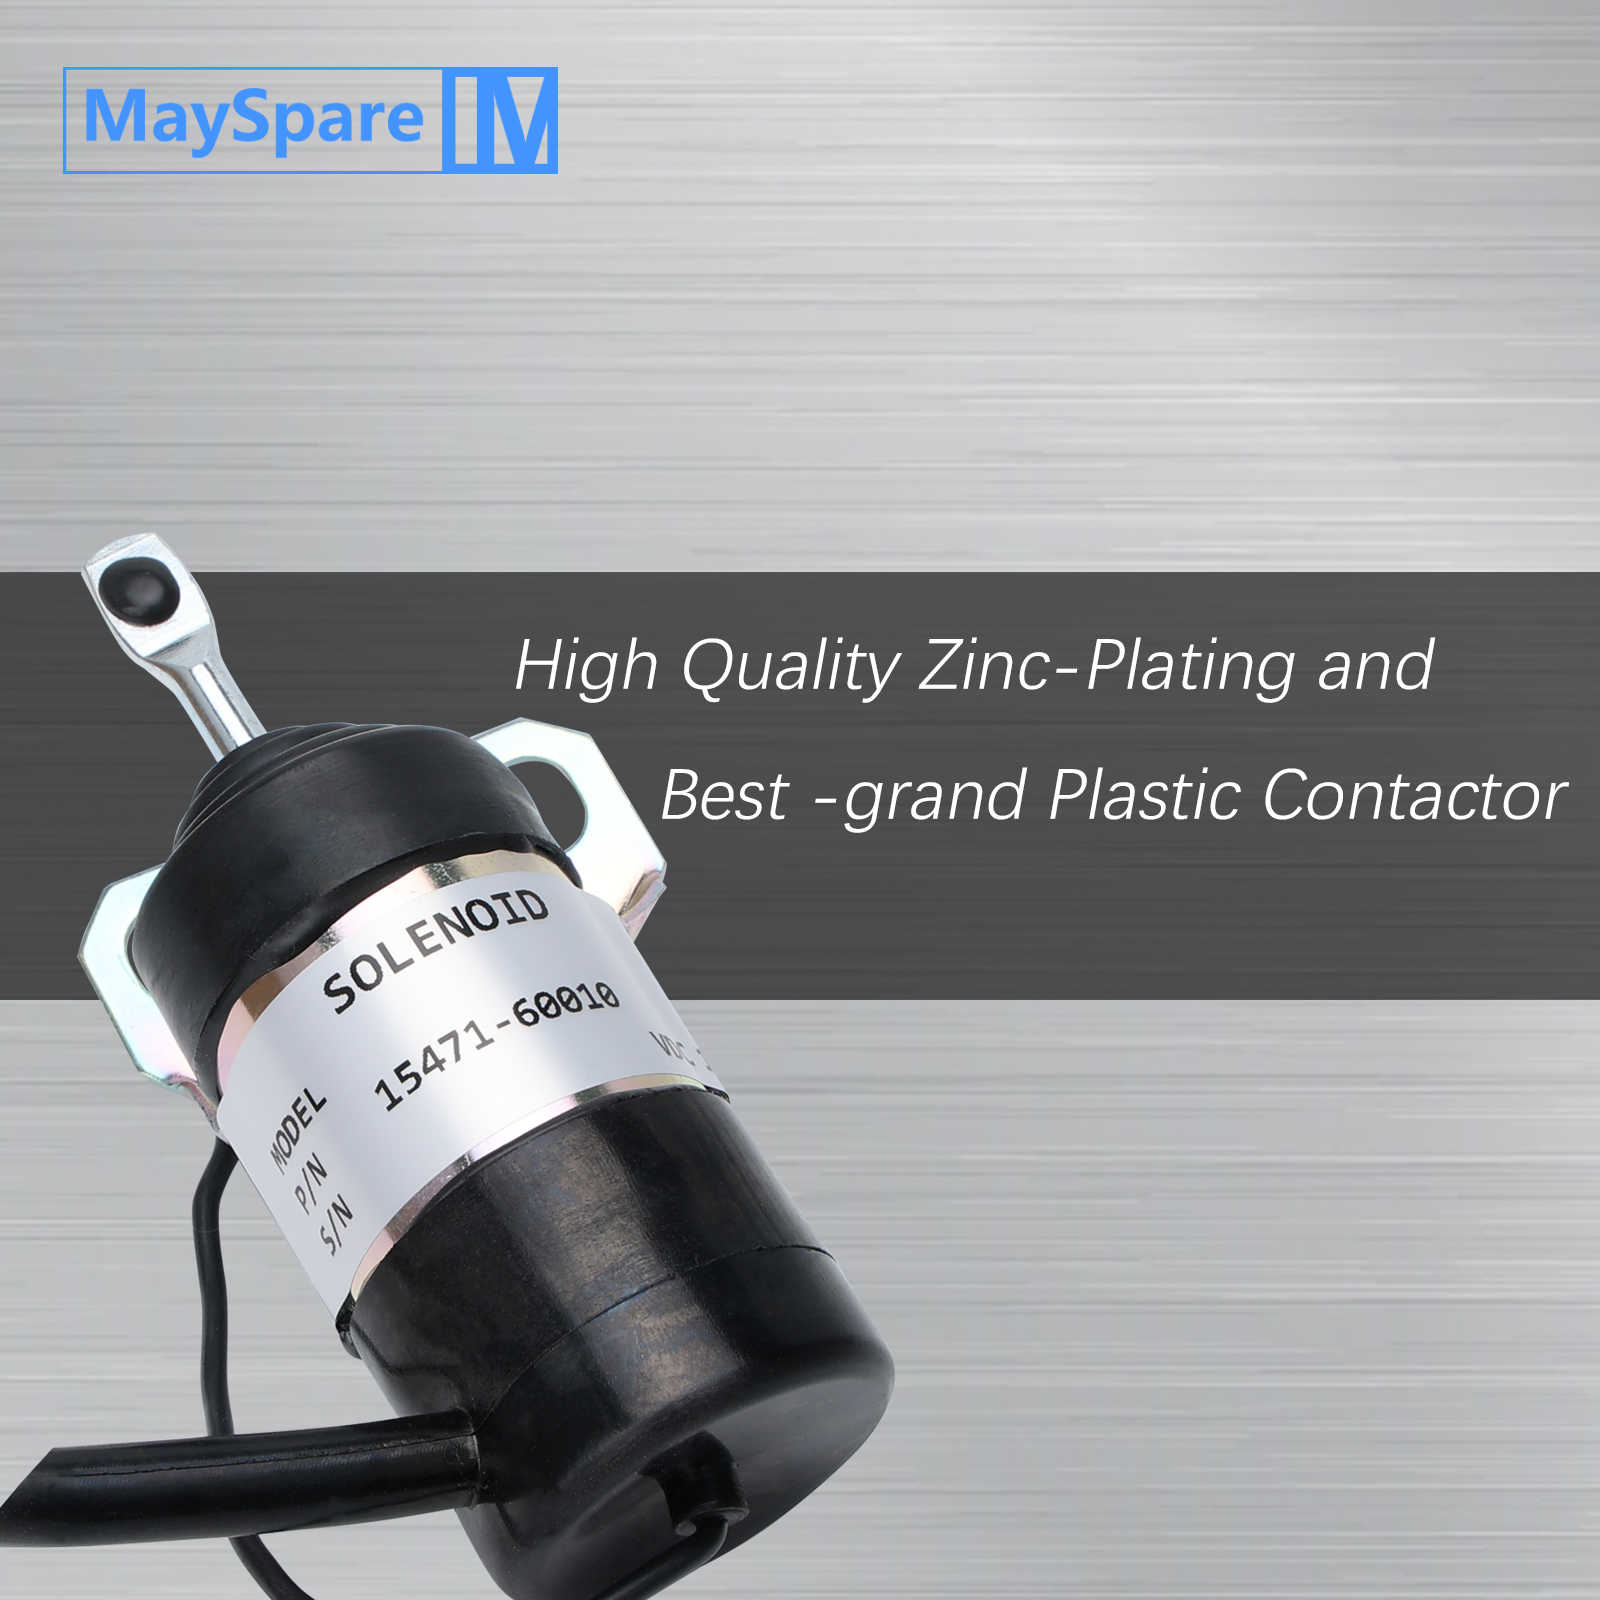 high quality zinc plating and best grand plastic contactor